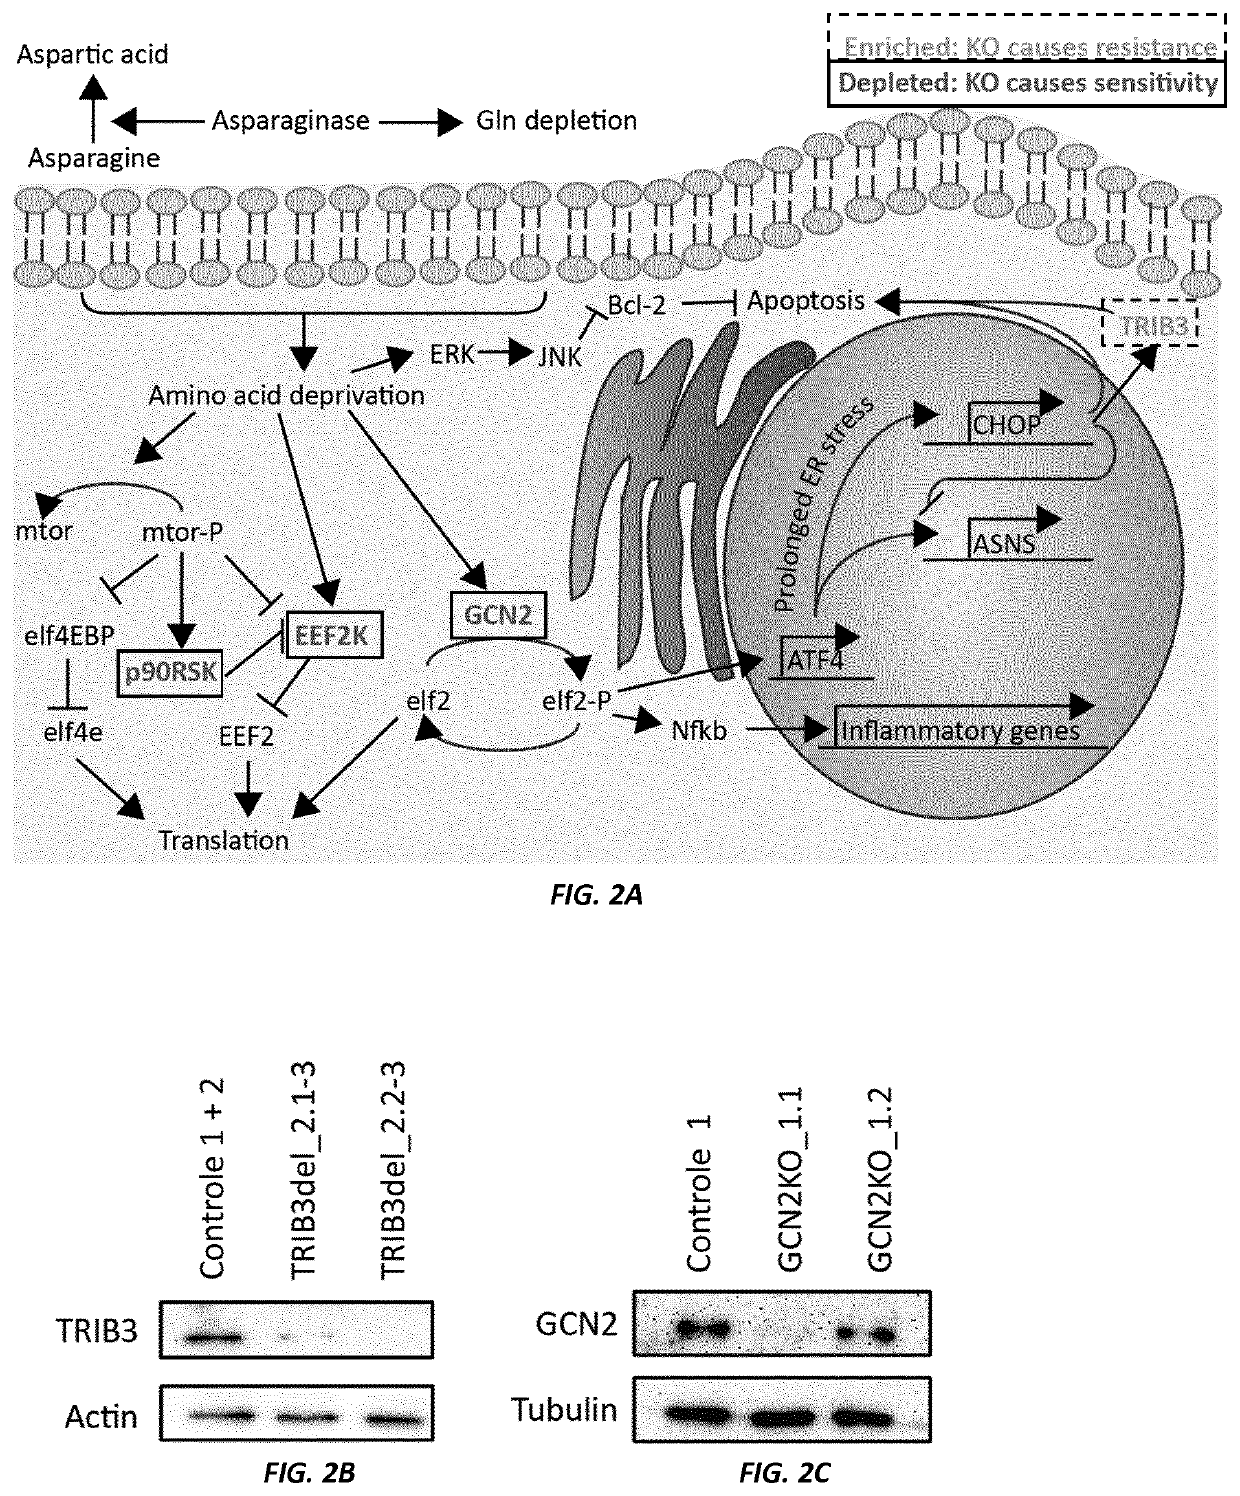 Synergistic Combinations of Amino Acid Depletion Agent Sensitizers (AADAS) and Amino Acid Depletion Agents (AADA), and Therapeutic Methods of Use Thereof